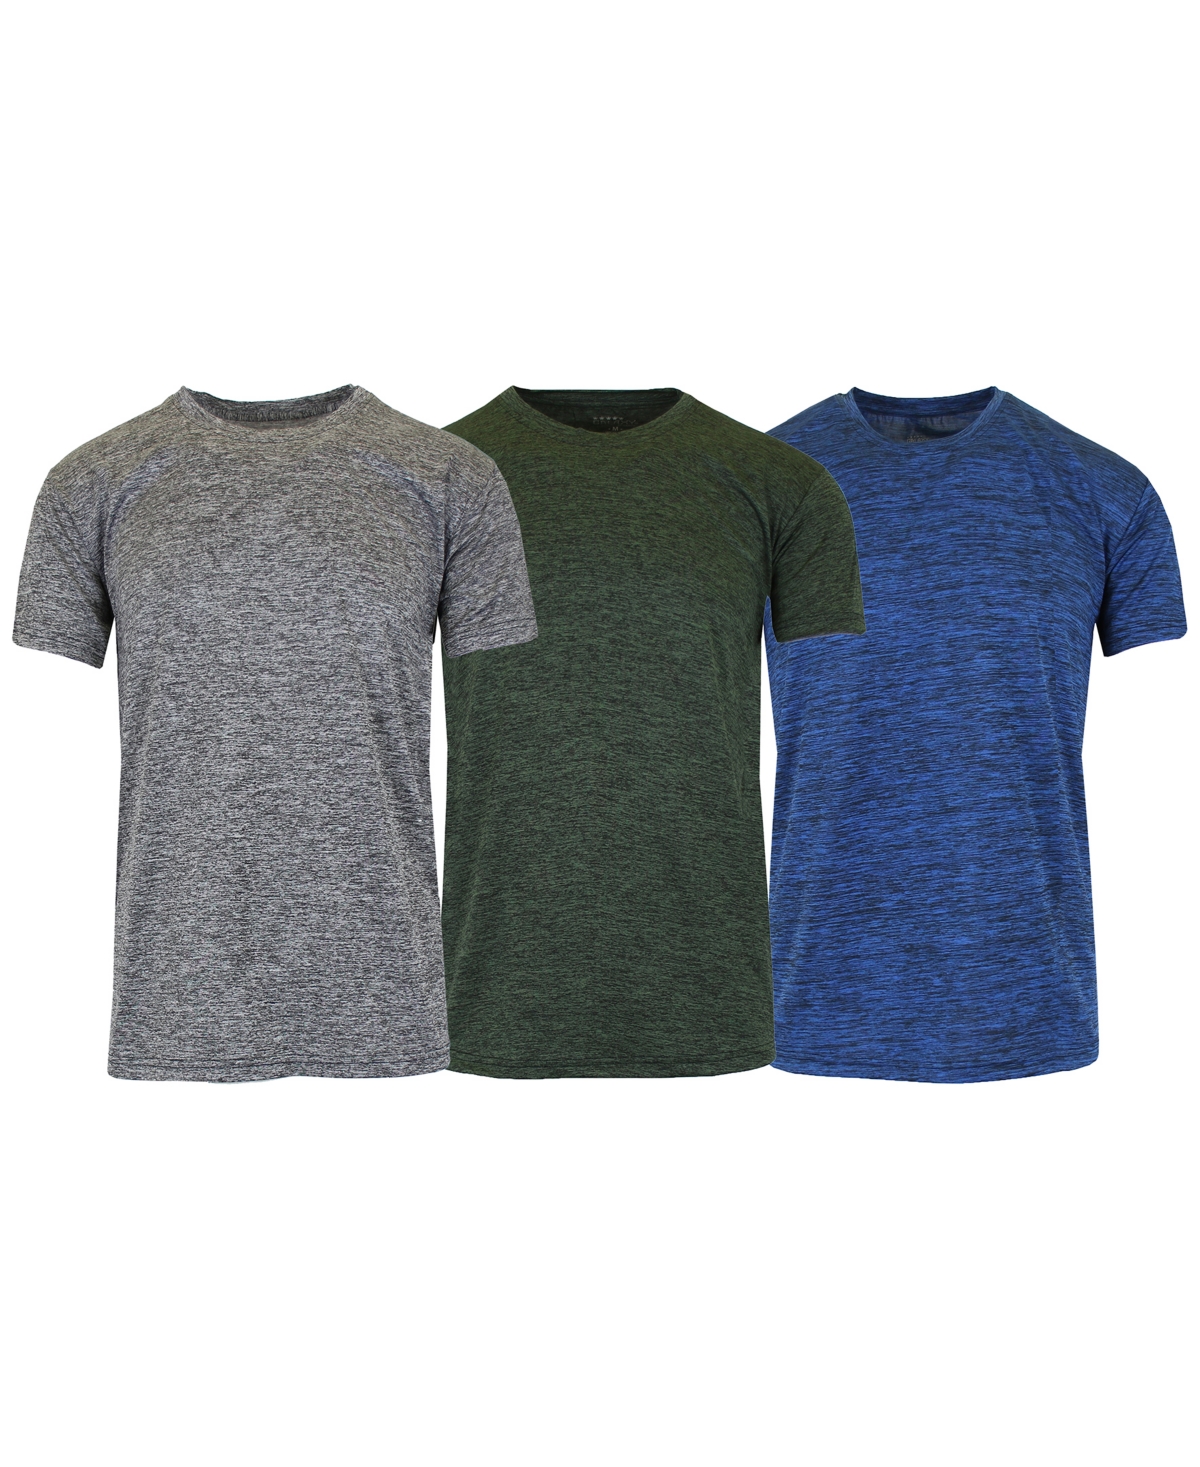 Galaxy By Harvic Men's Performance T-shirt, Pack Of 3 In Gray,olive,royal